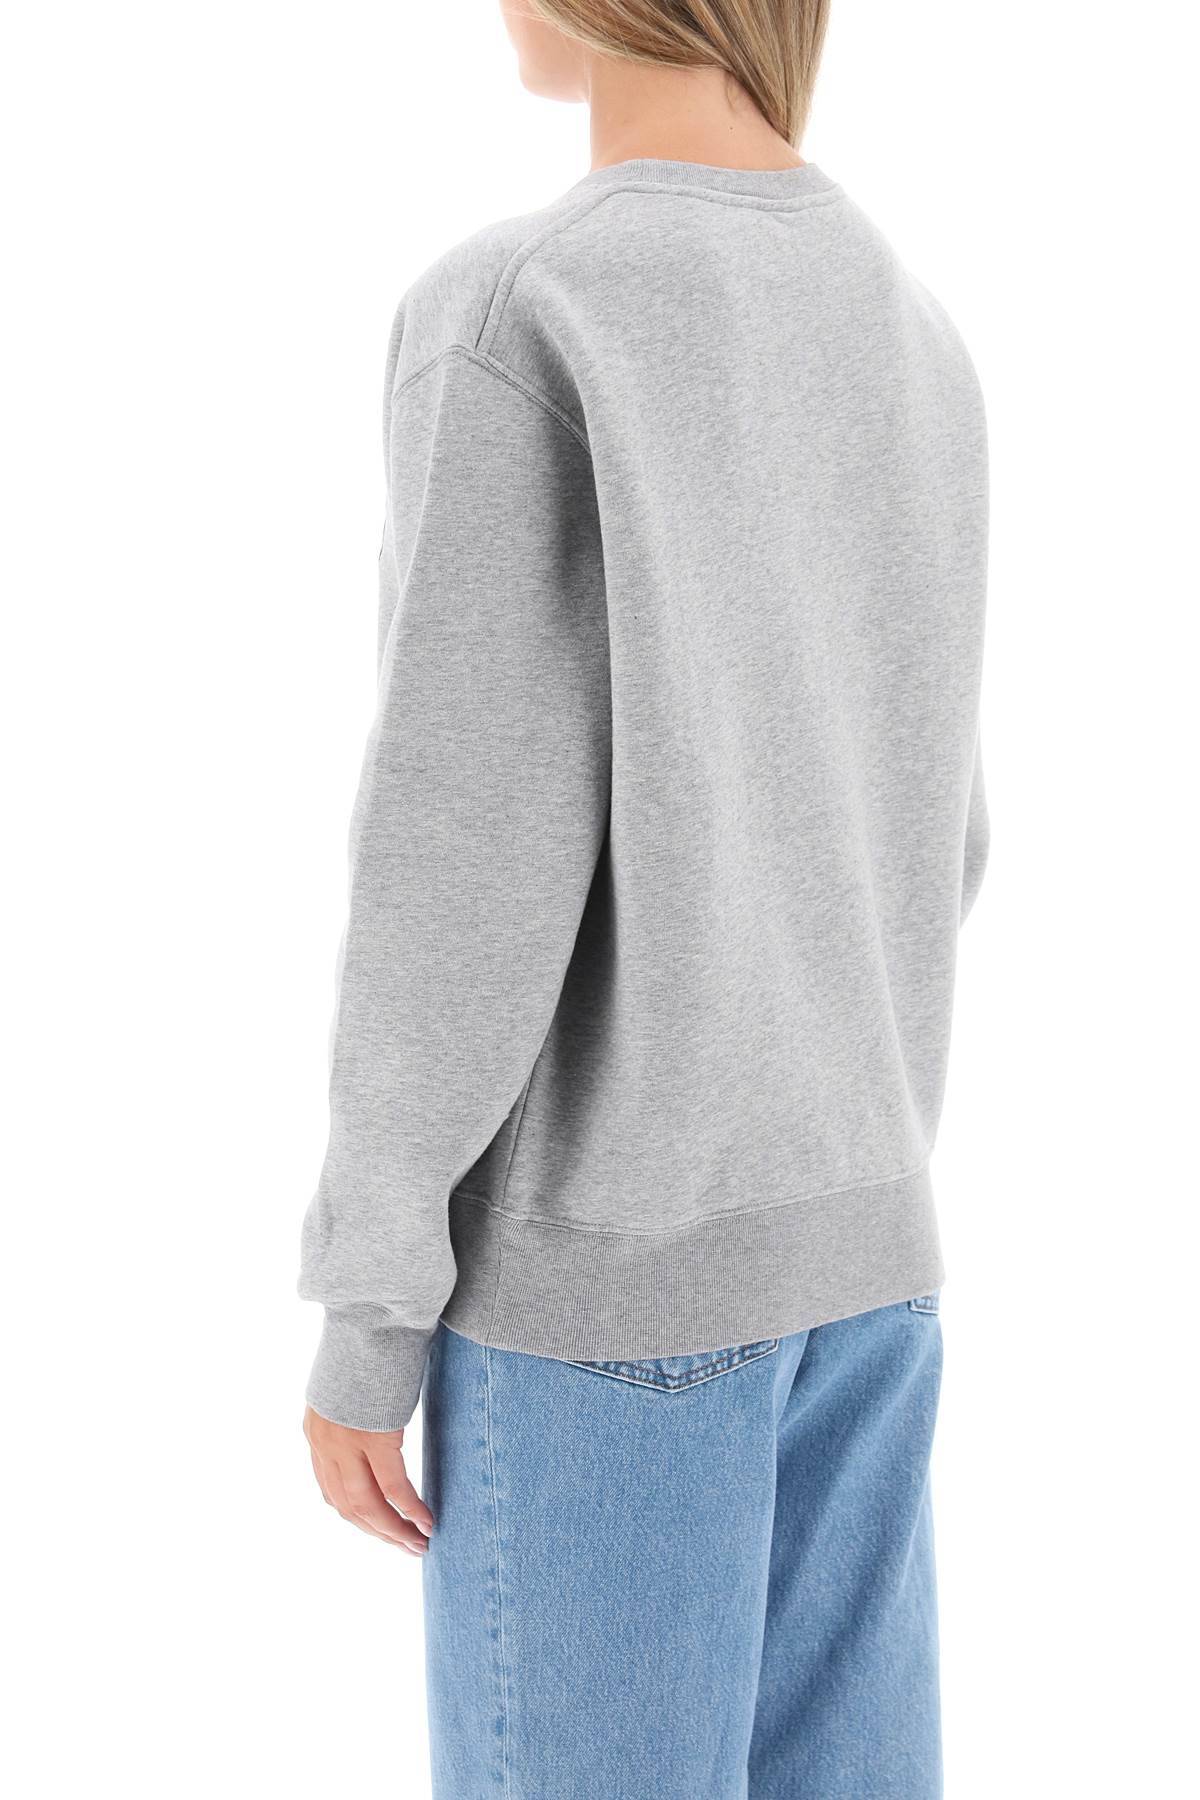 Shop Autry Crew-neck Sweatshirt With Logo Embroidery In Grey